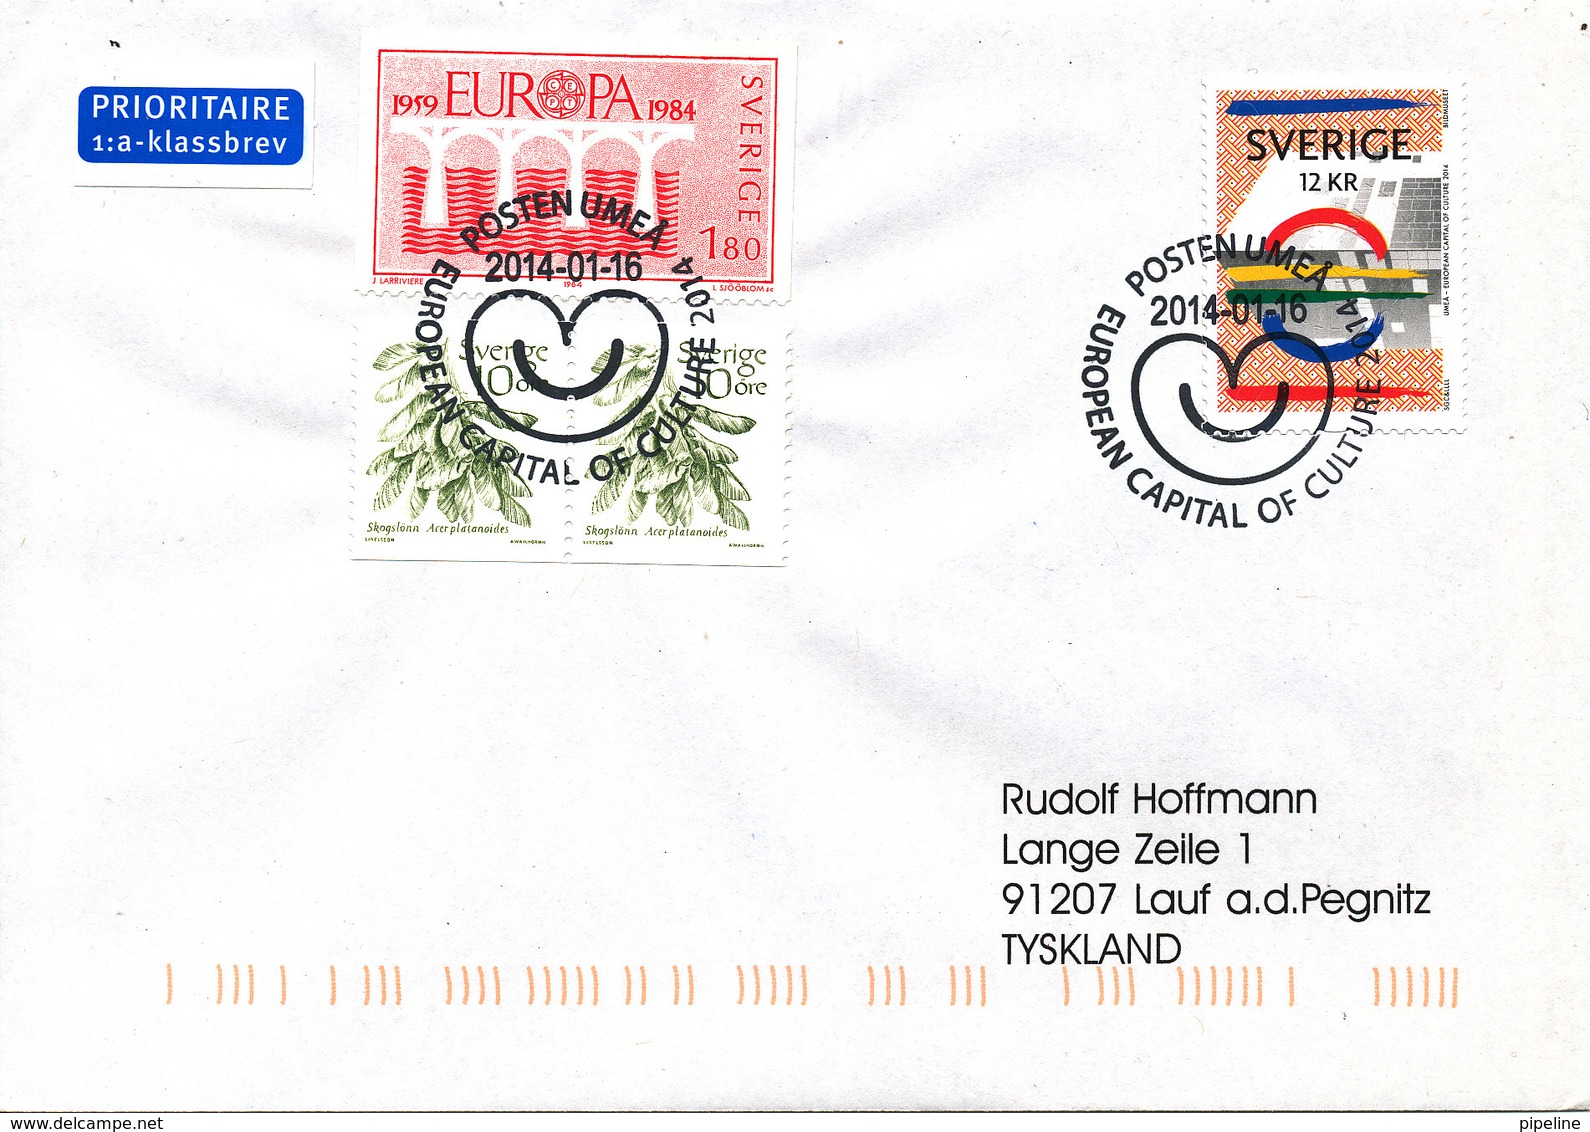 Sweden Cover With Special Postmark Umea European Capital Of Culture 2014 16-1-2014 Sent To Germany - Covers & Documents